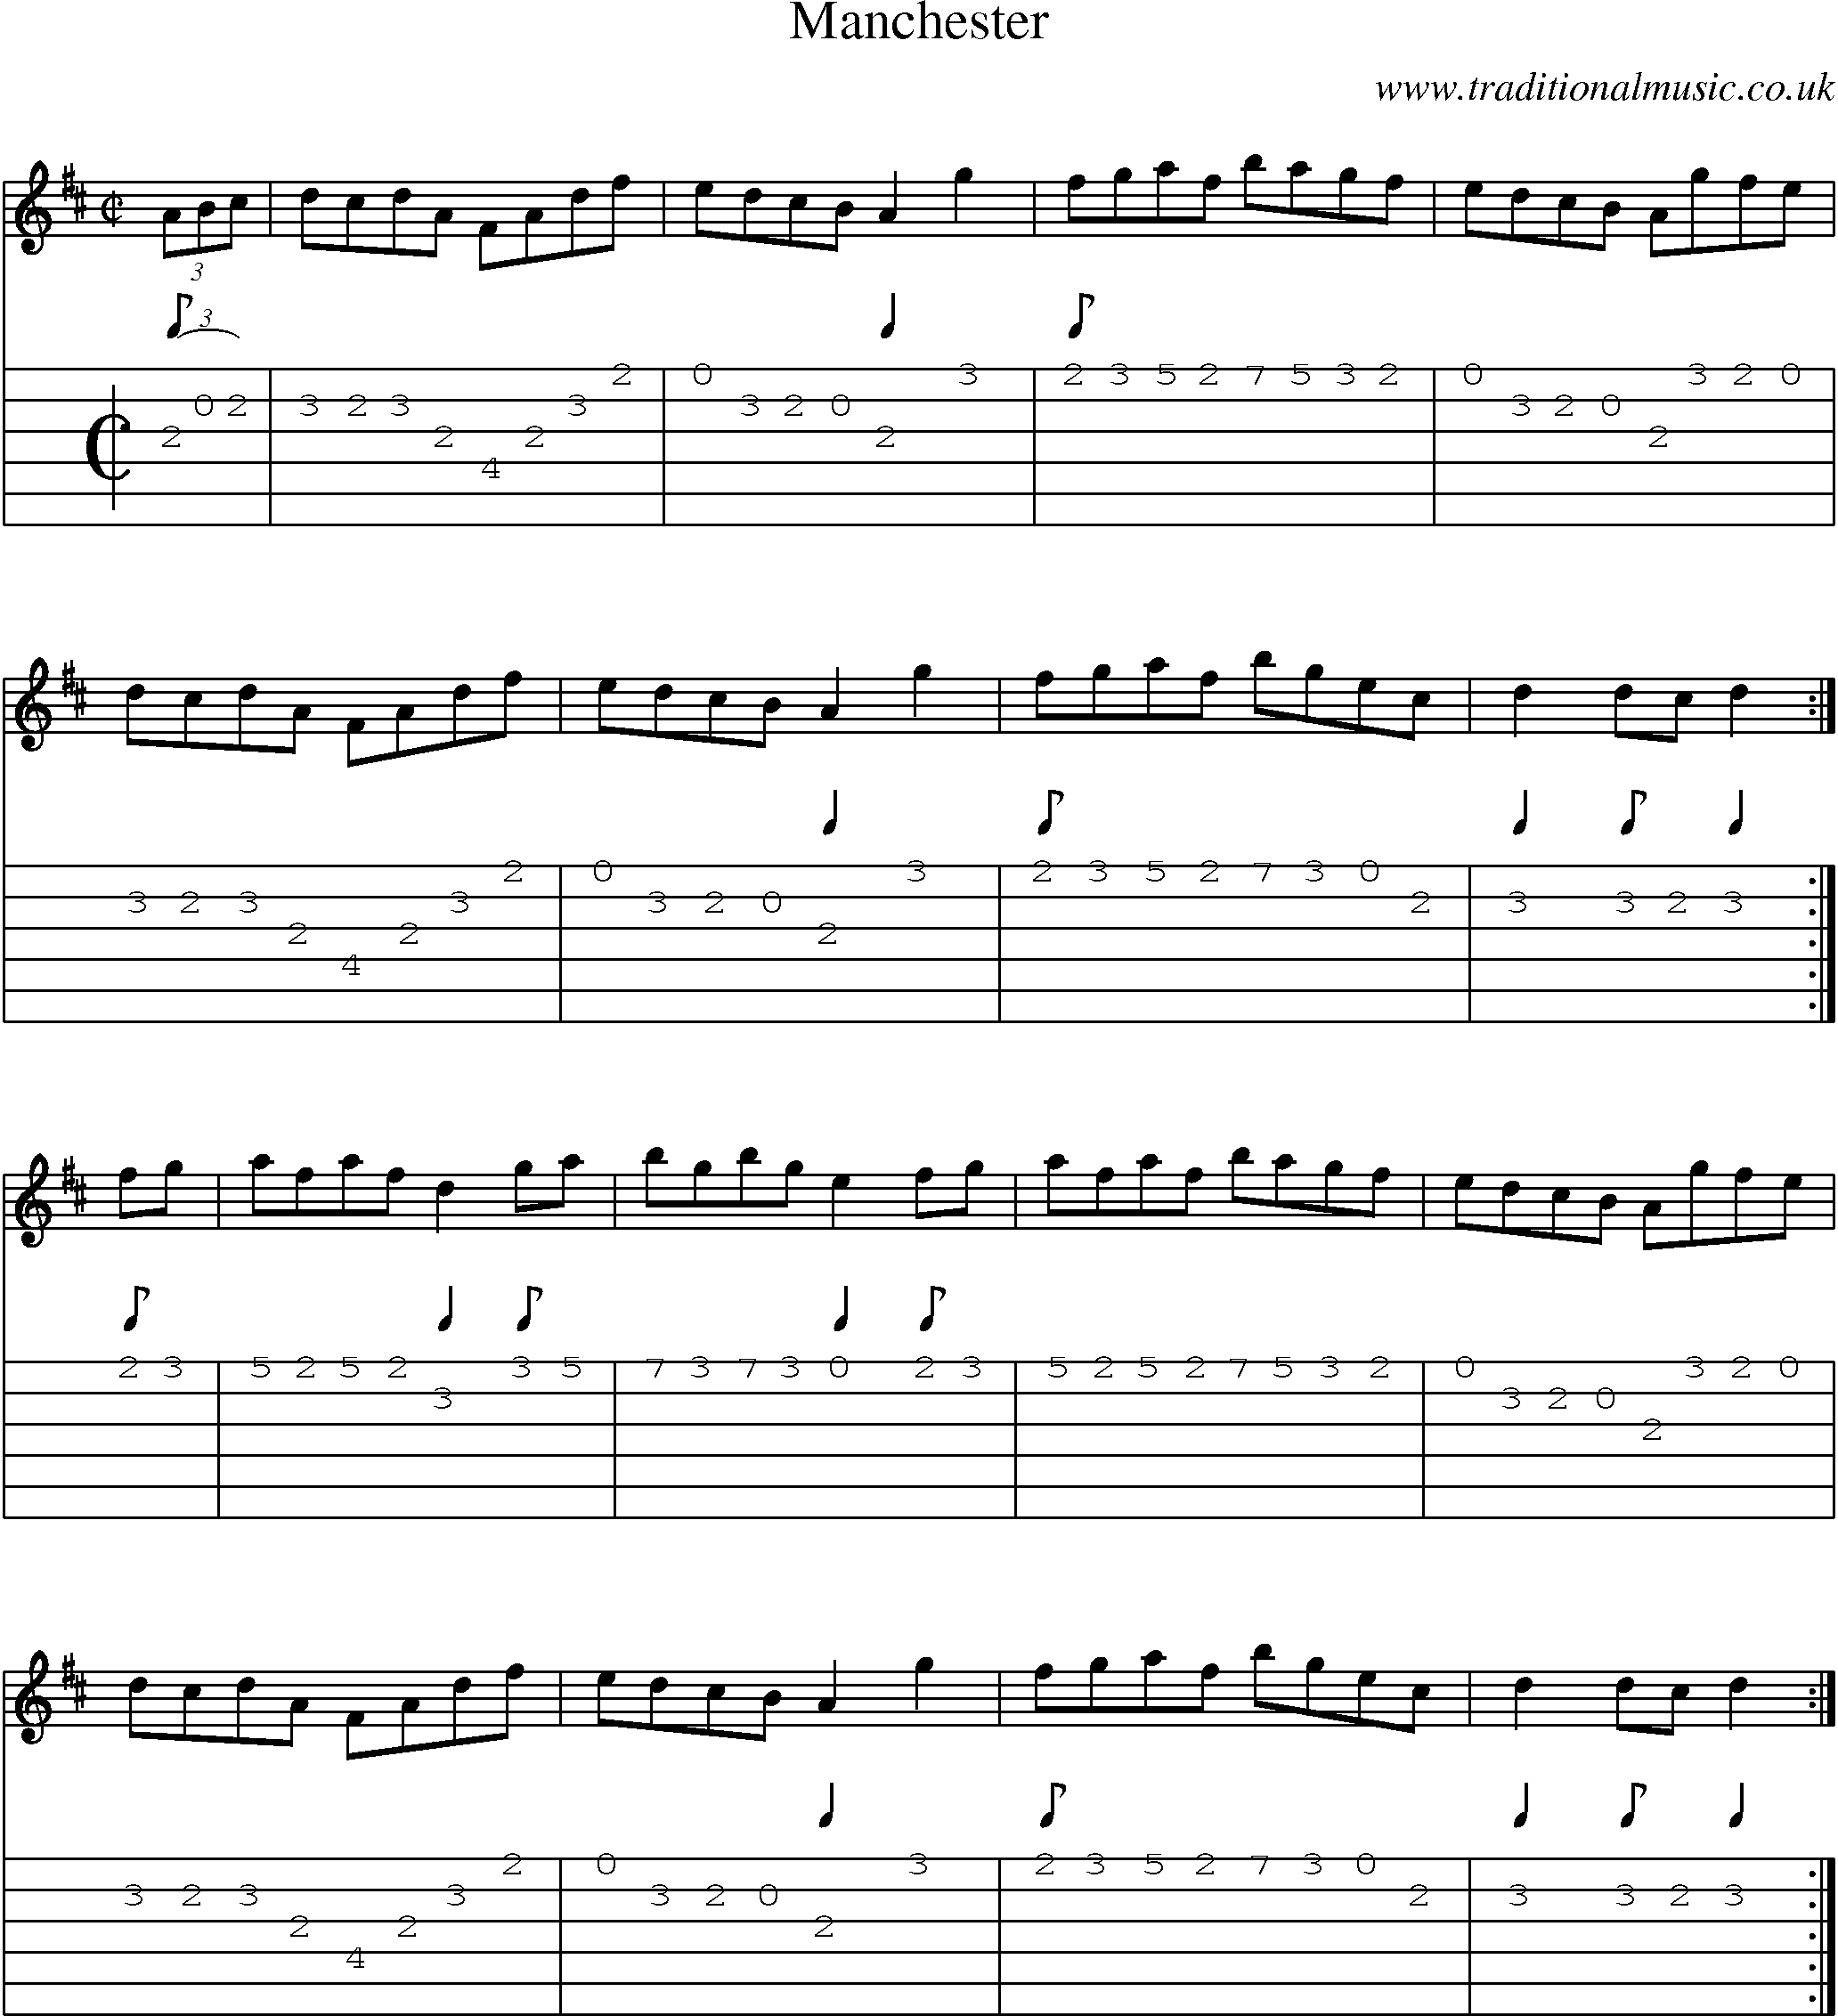 Music Score and Guitar Tabs for Manchester